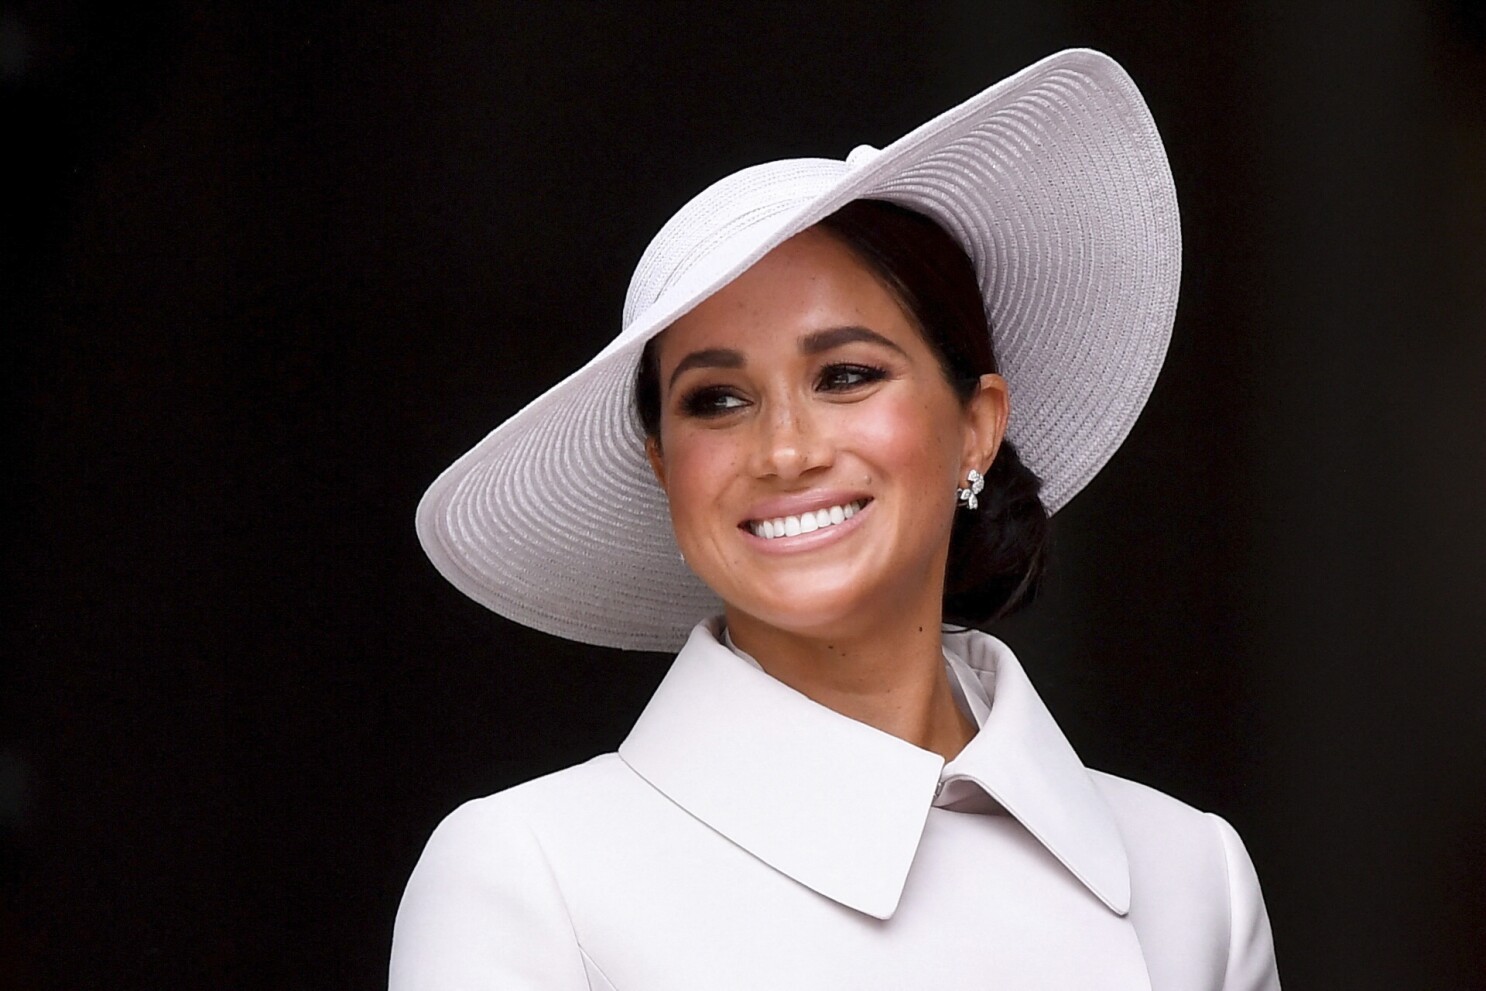 Meghan Markle Tells All in First Magazine Interview Since Quitting Royal Family